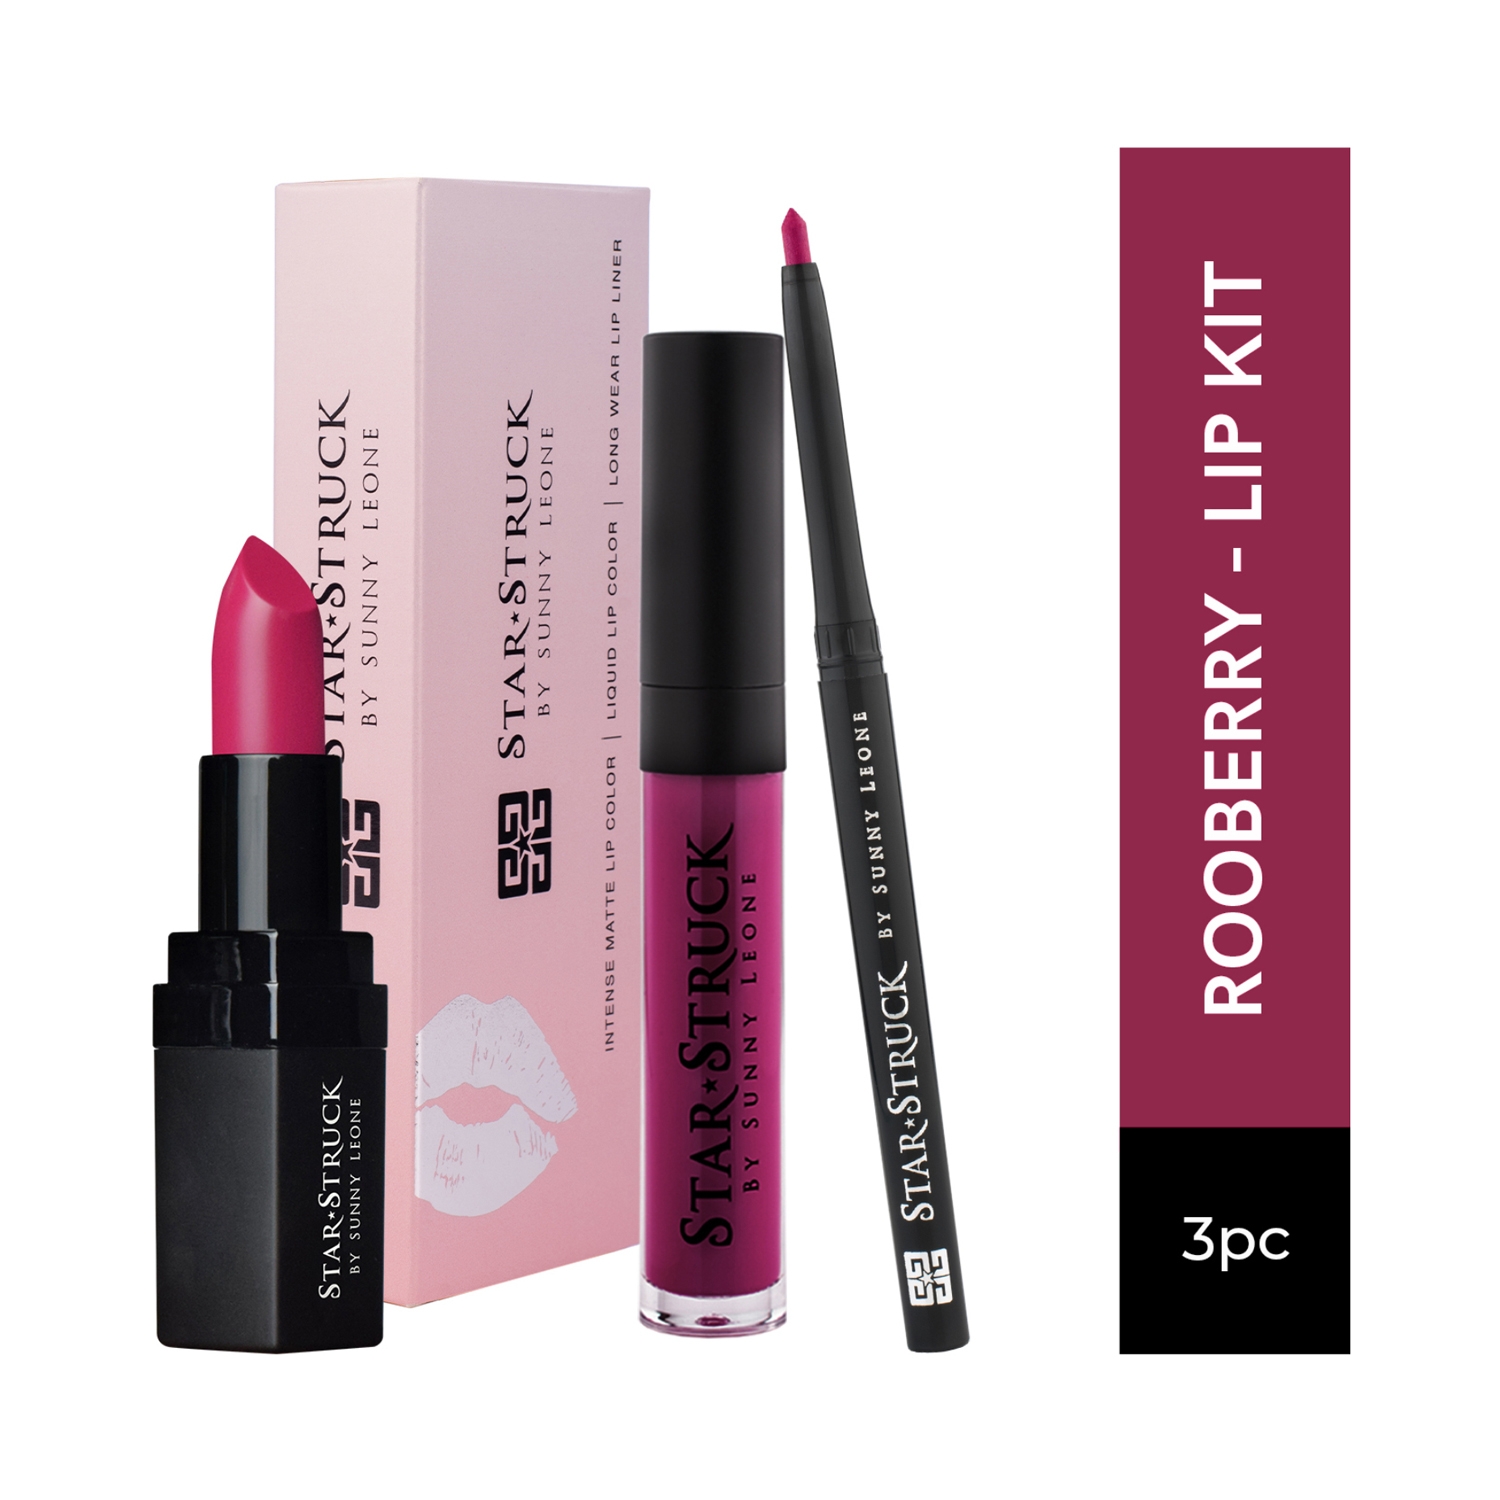 Star Struck by Sunny Leone | Star Struck by Sunny Leone Lip Gloss With Lip Liner & Lipstick Lip Kit - Rooberry (3 Pcs)